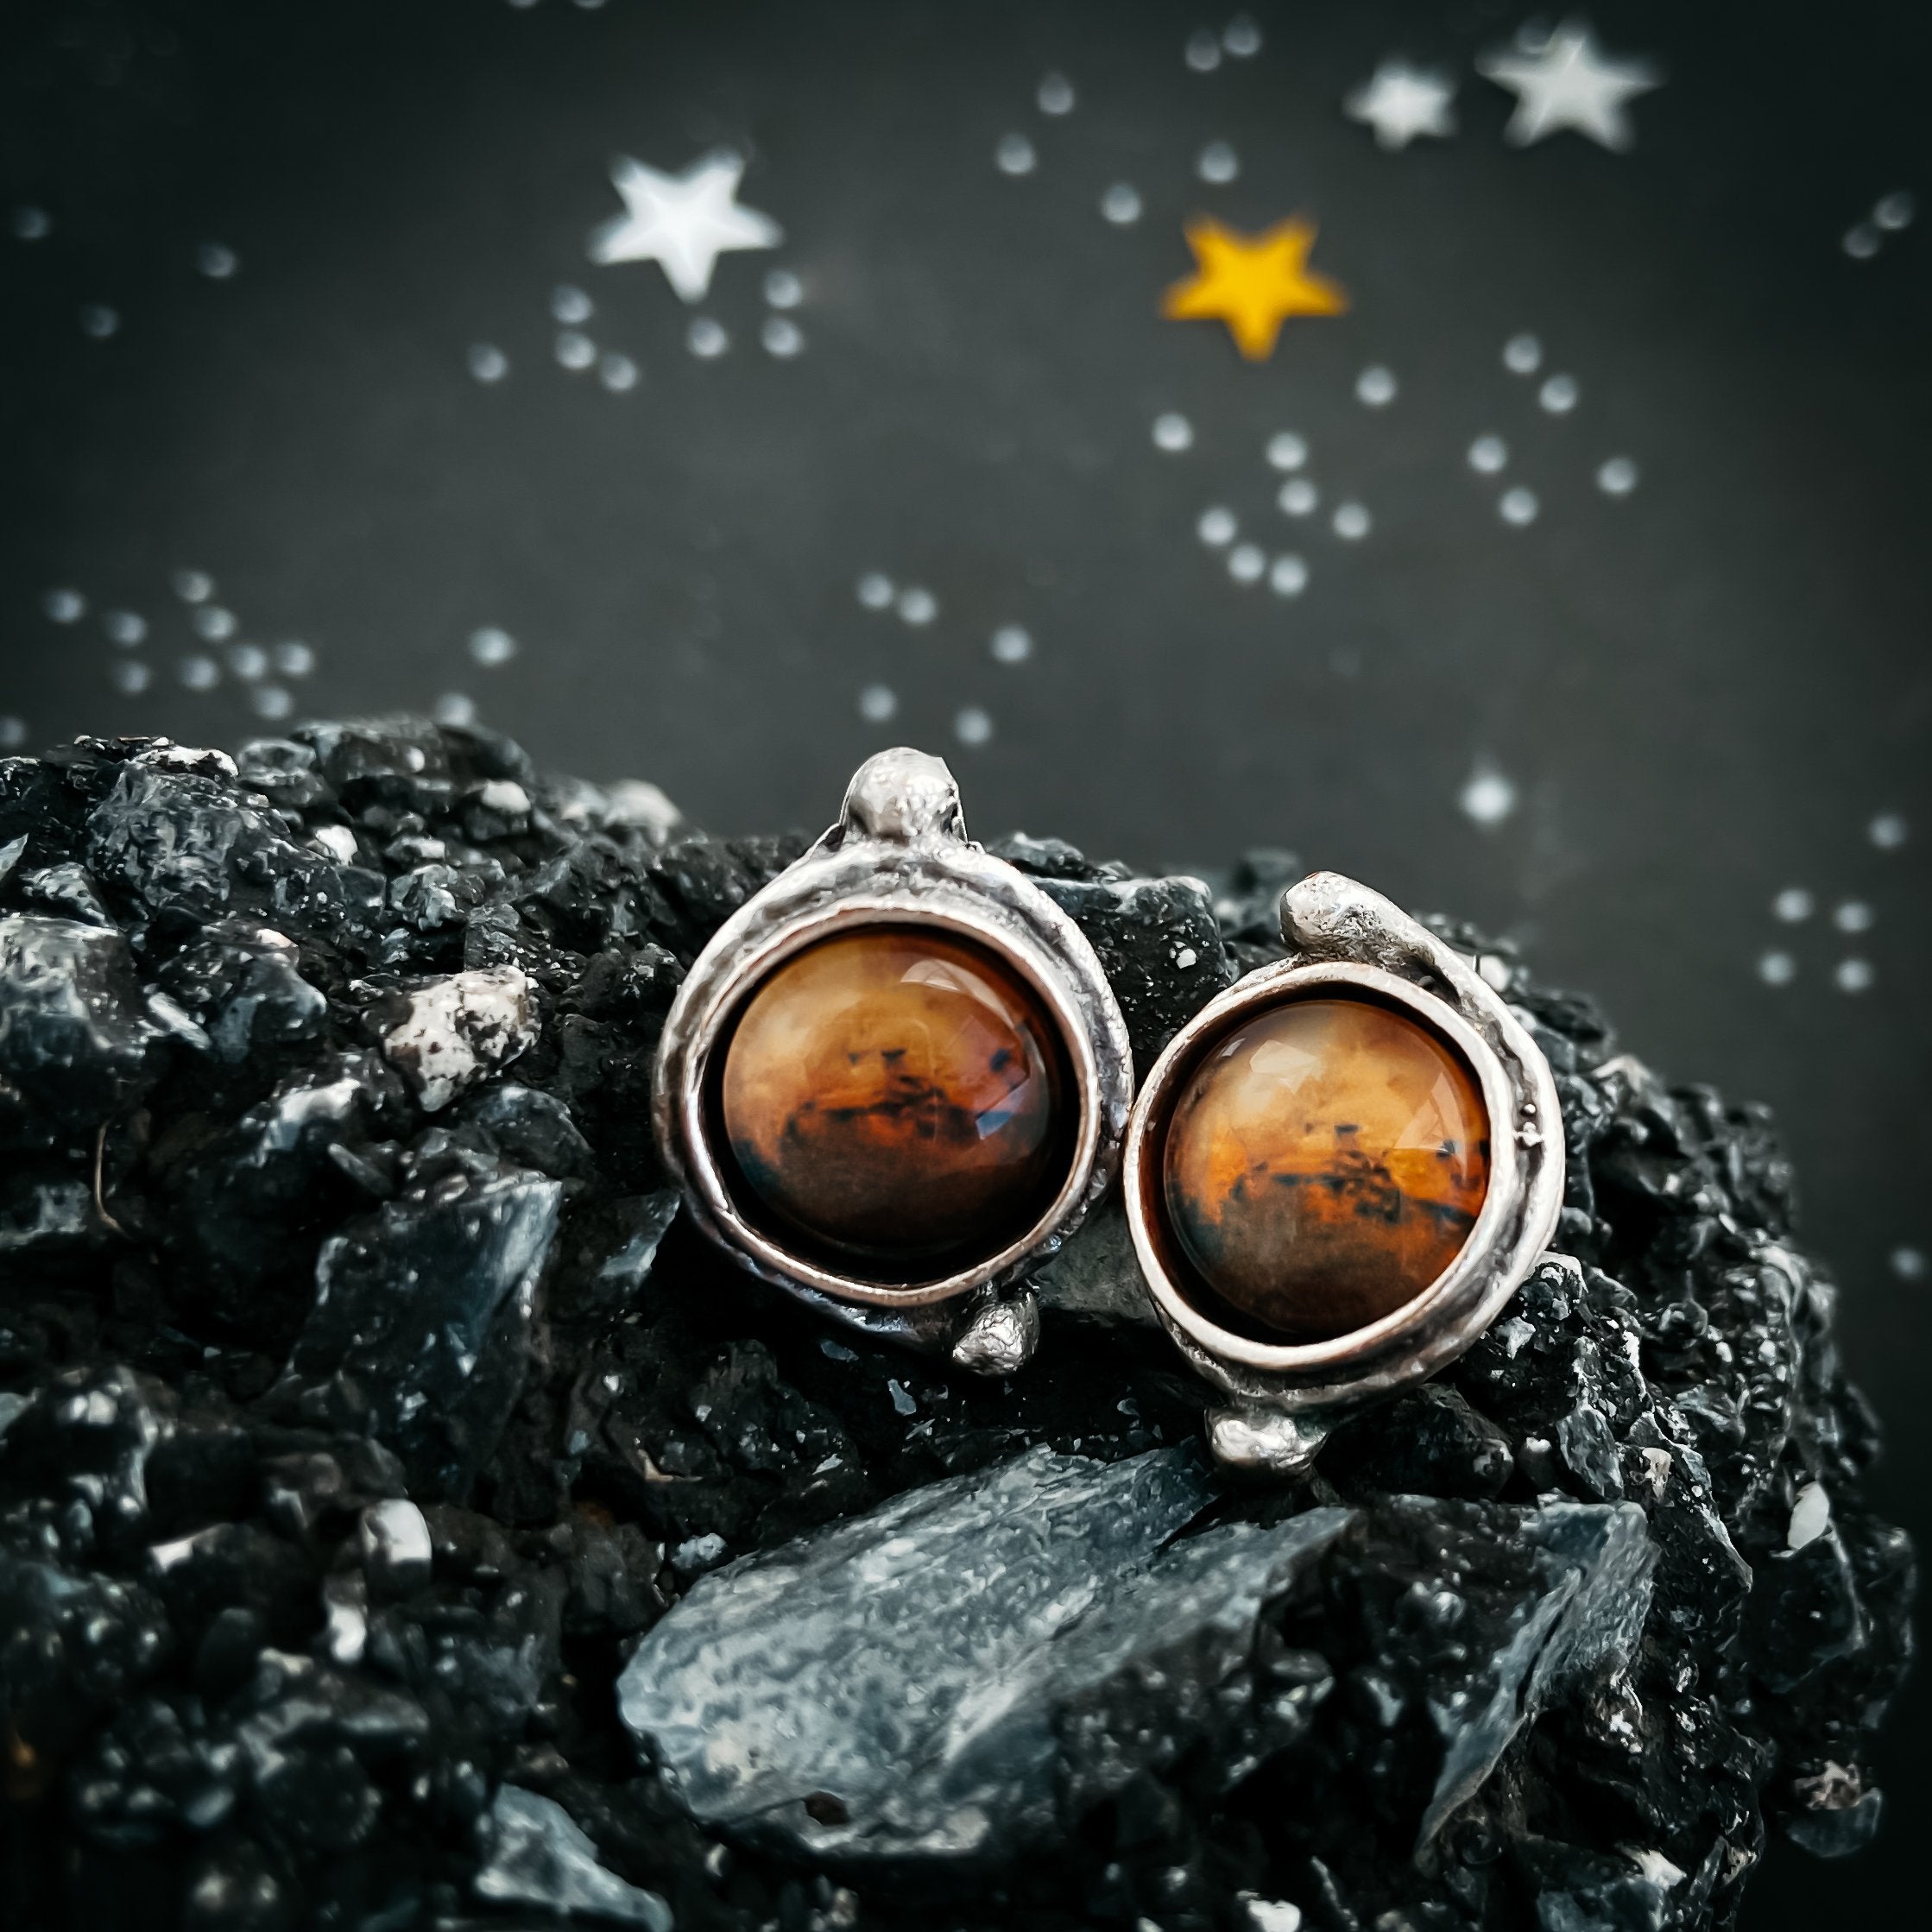 Mars and Moons Earrings - Studs or Dangles in Silver Plated Brass and Glass - Jewelry & Watches - Bijou Her -  -  - 